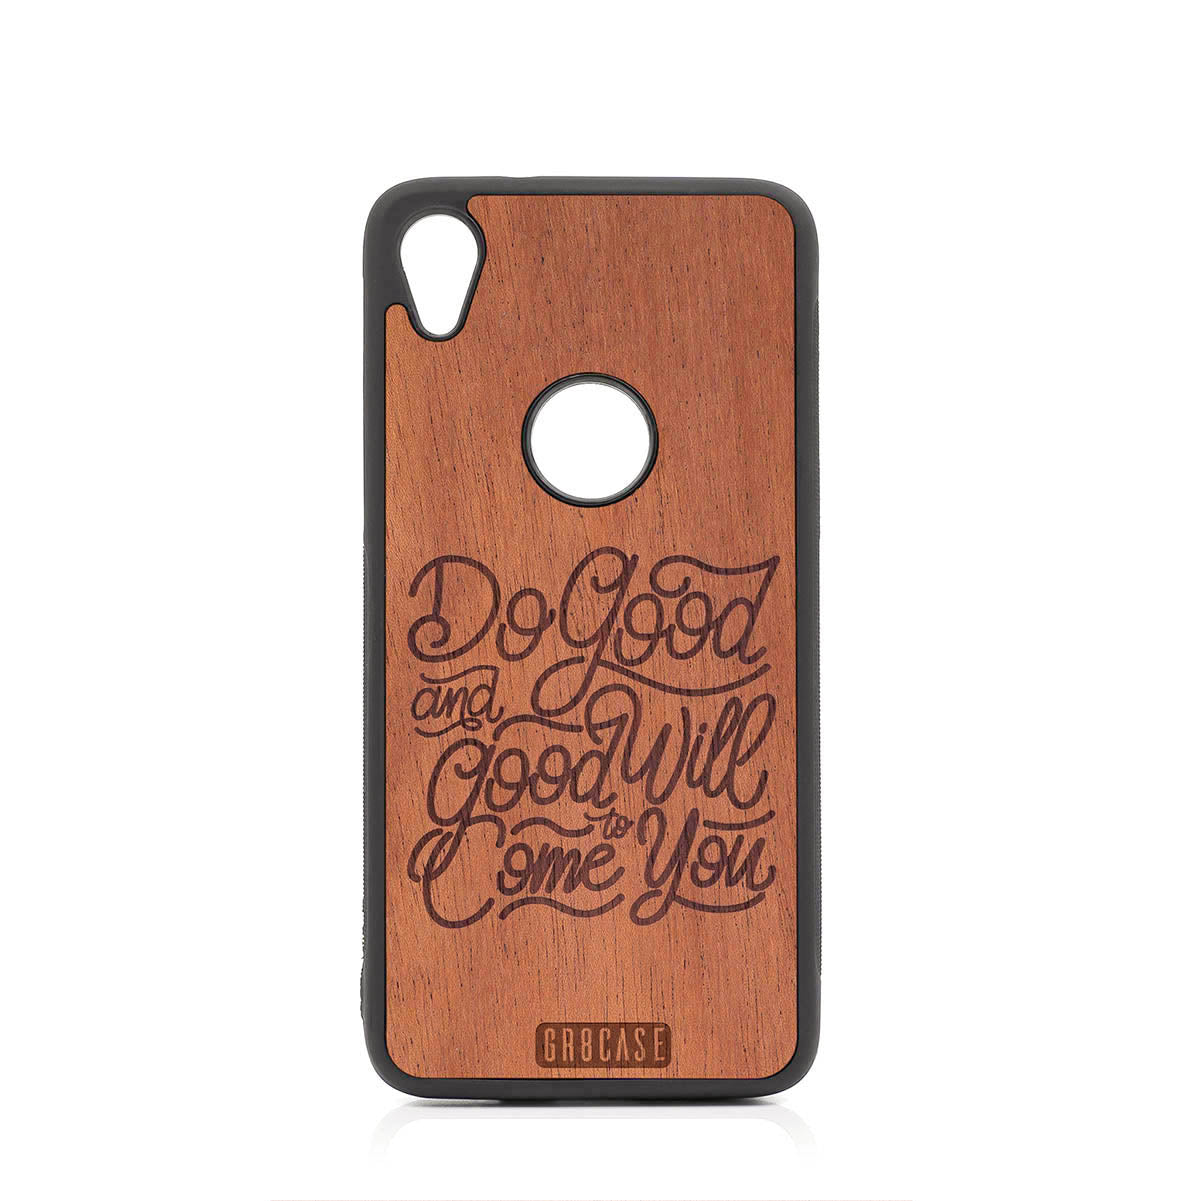 Do Good And Good Will Come To You Design Wood Case For Moto E6 by GR8CASE